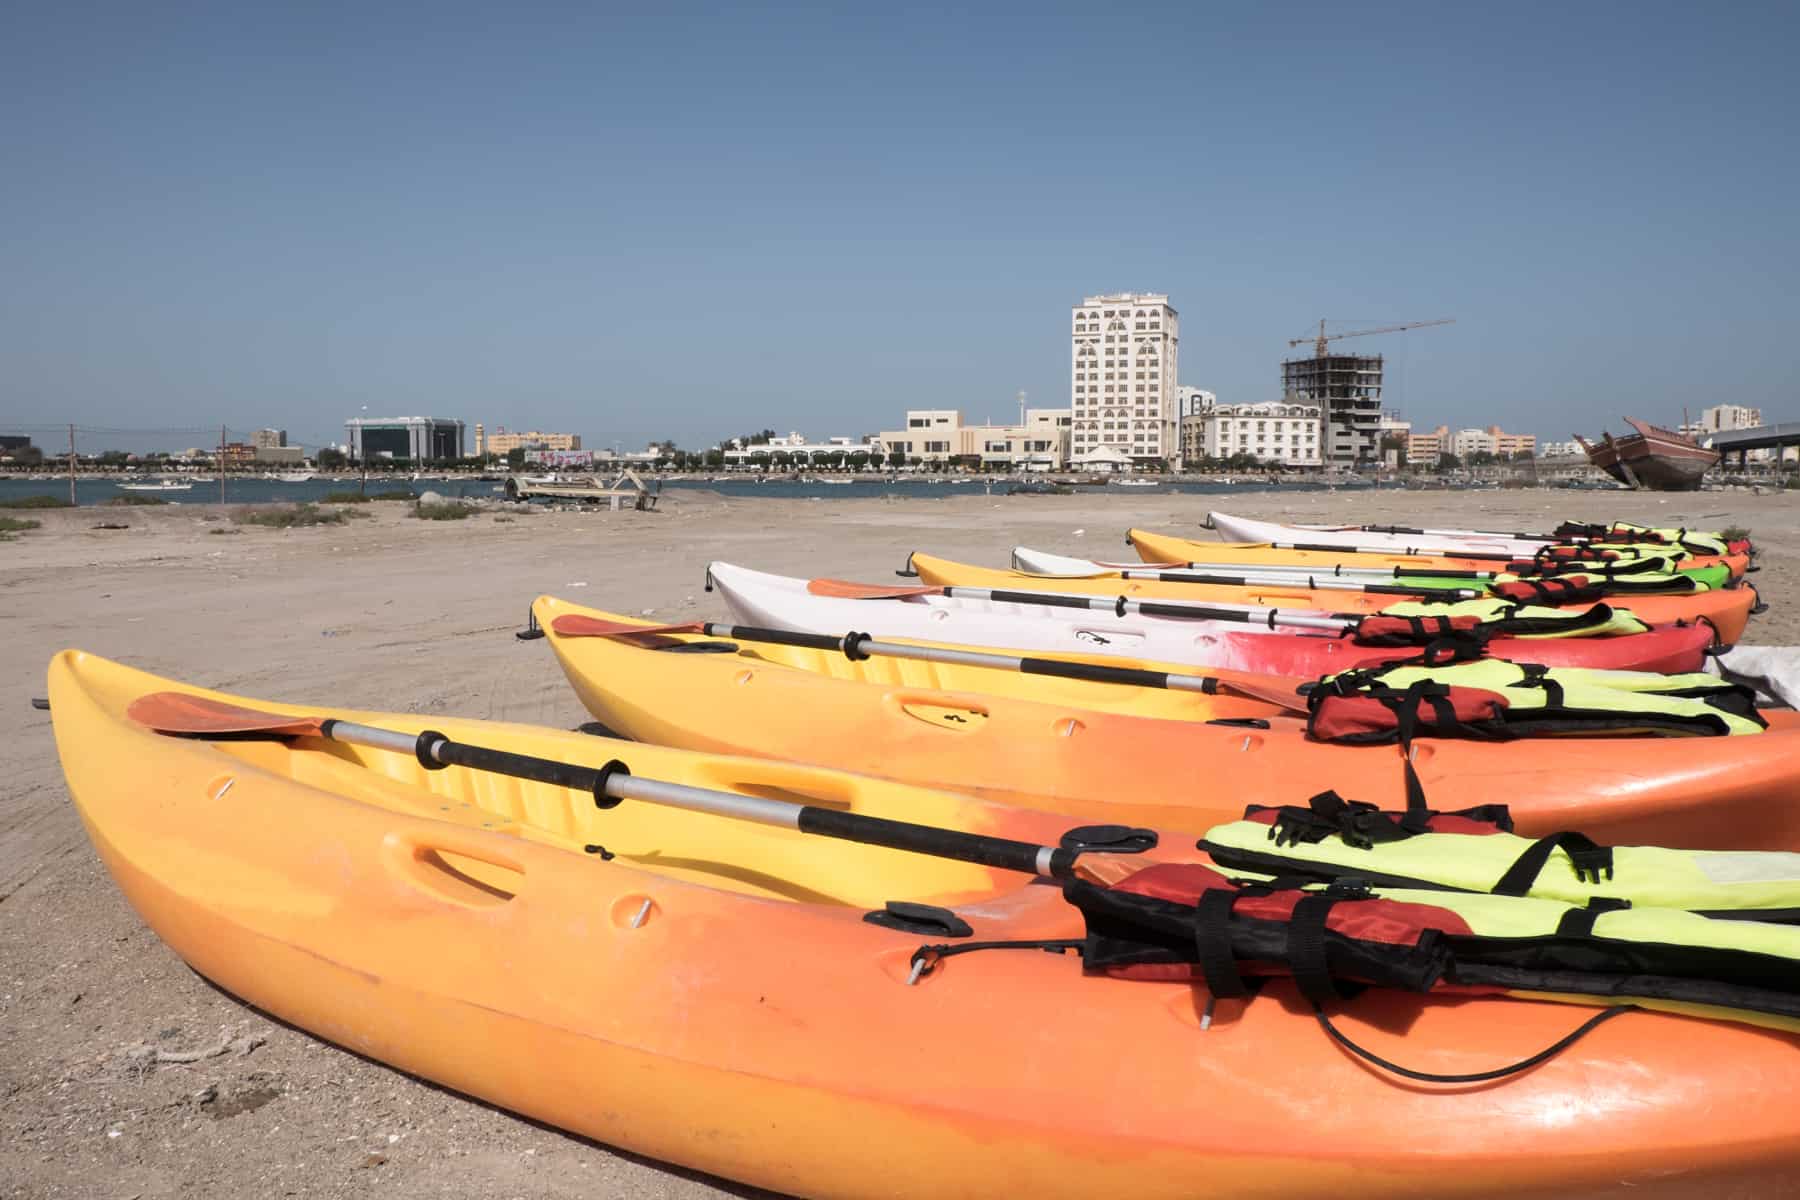 A row of seven orange and white kayaks on a sand beach next to a body of water in the city of Ras Al Khaimah in the UAE